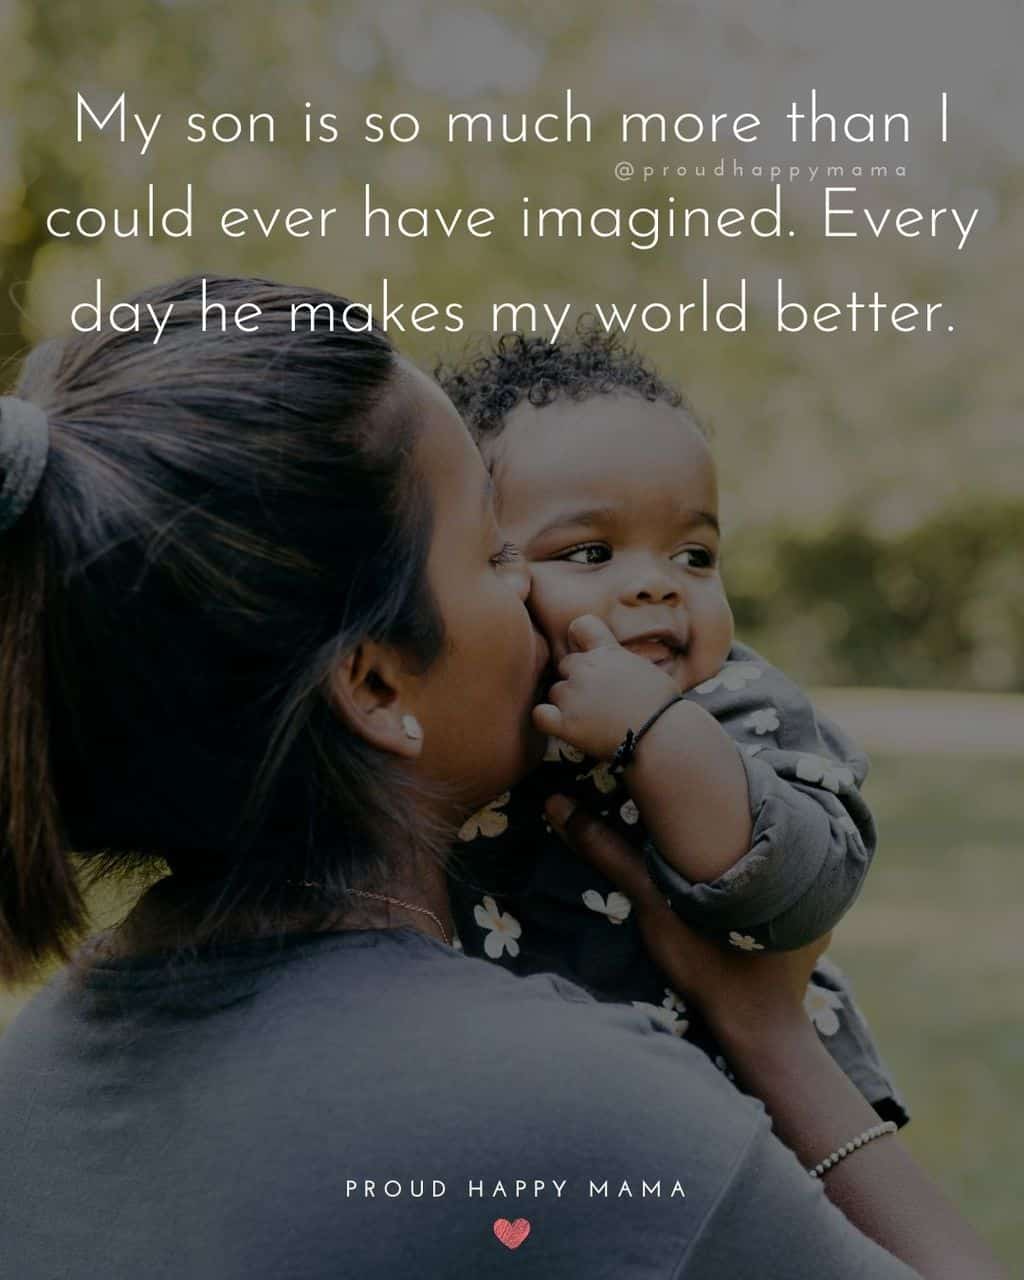 Son Quotes - My son is so much more than I could ever have imagined. Every day he makes my world better.’